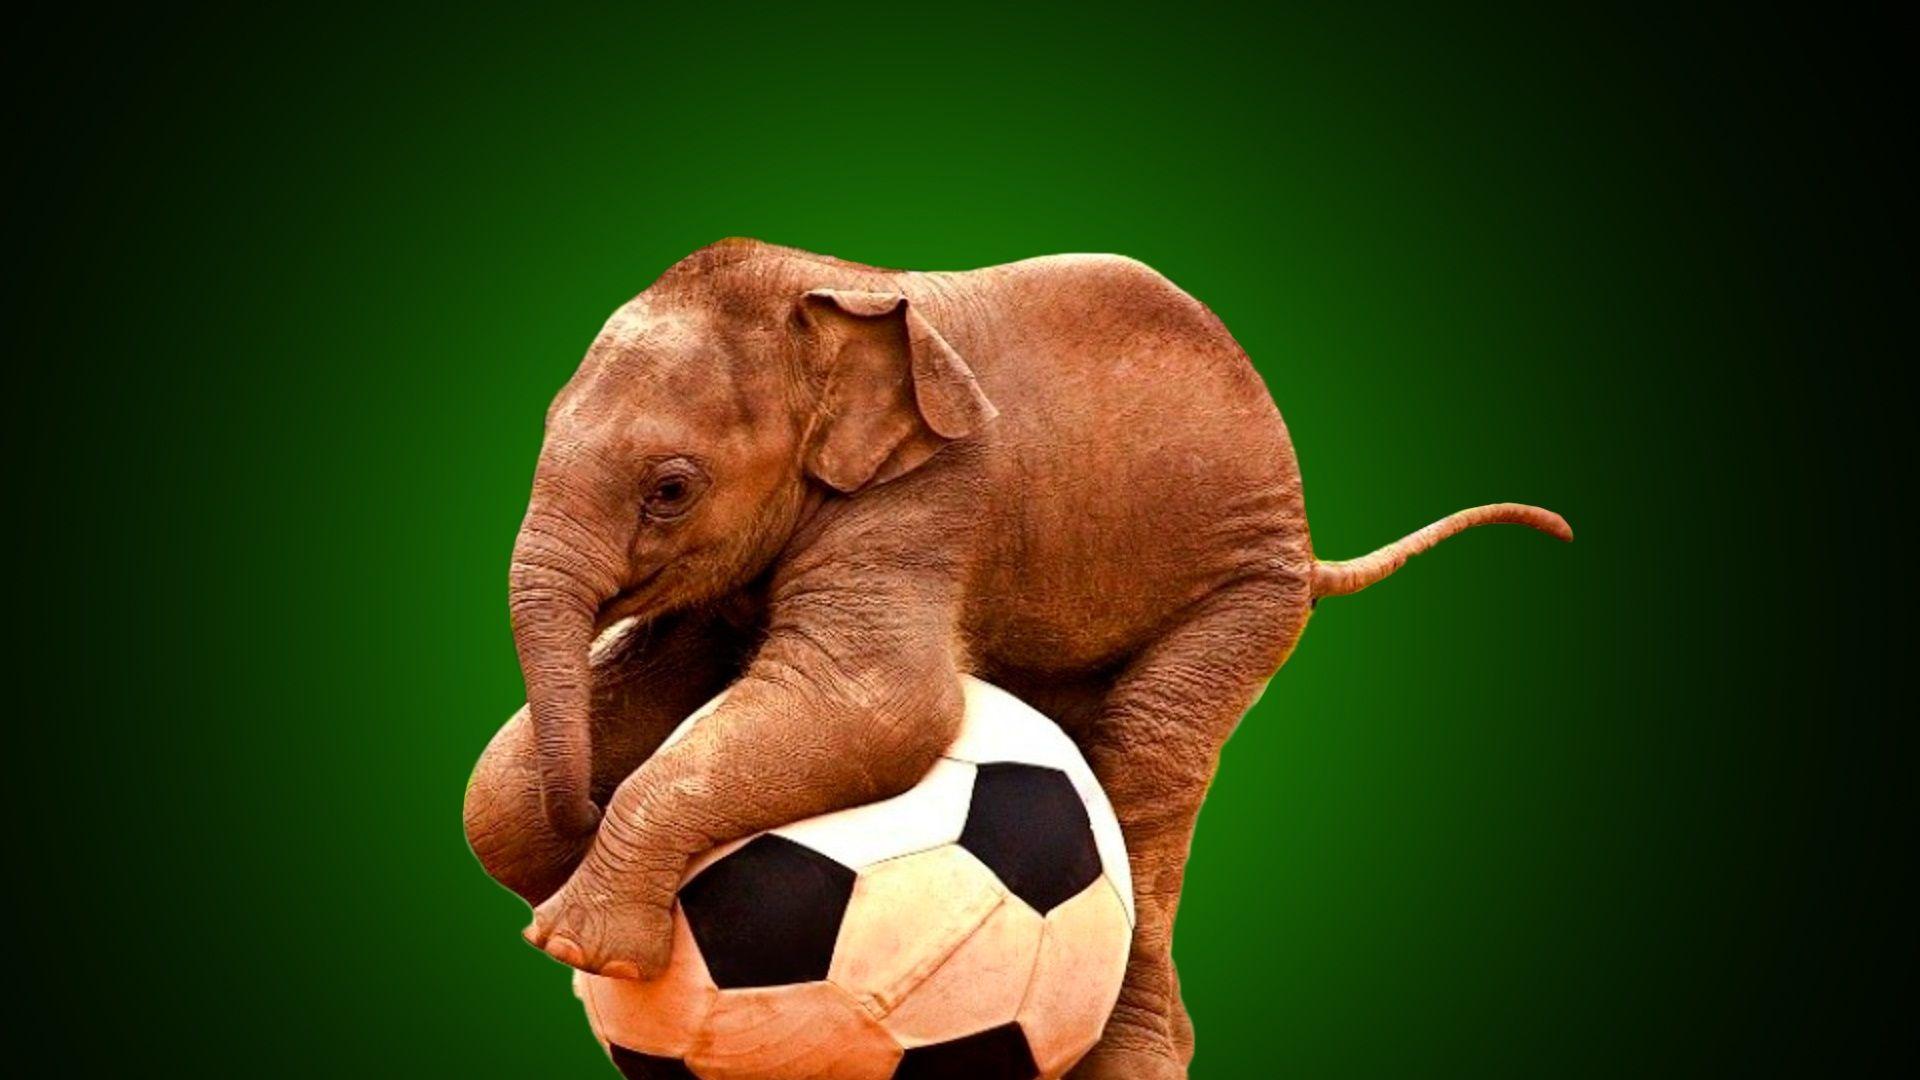 Elephant playing with ball very funny. Beautiful HD wallpaper